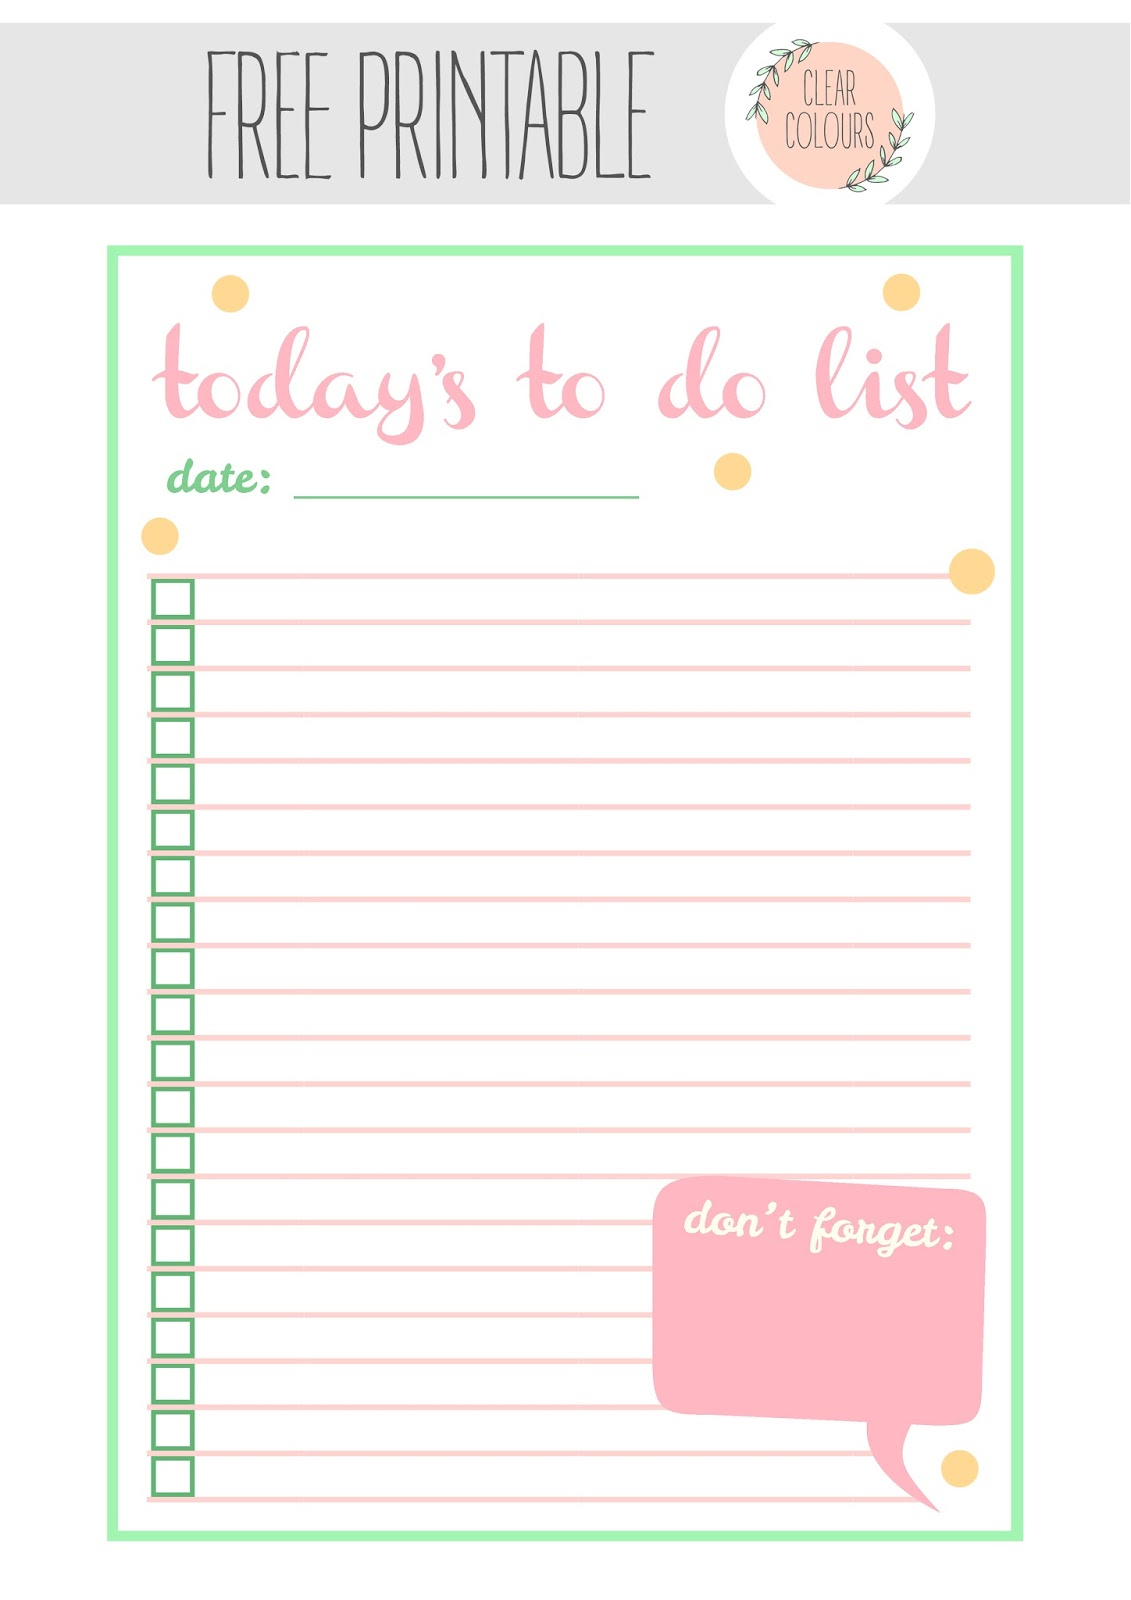 Clear Colours Free Printables To Do List